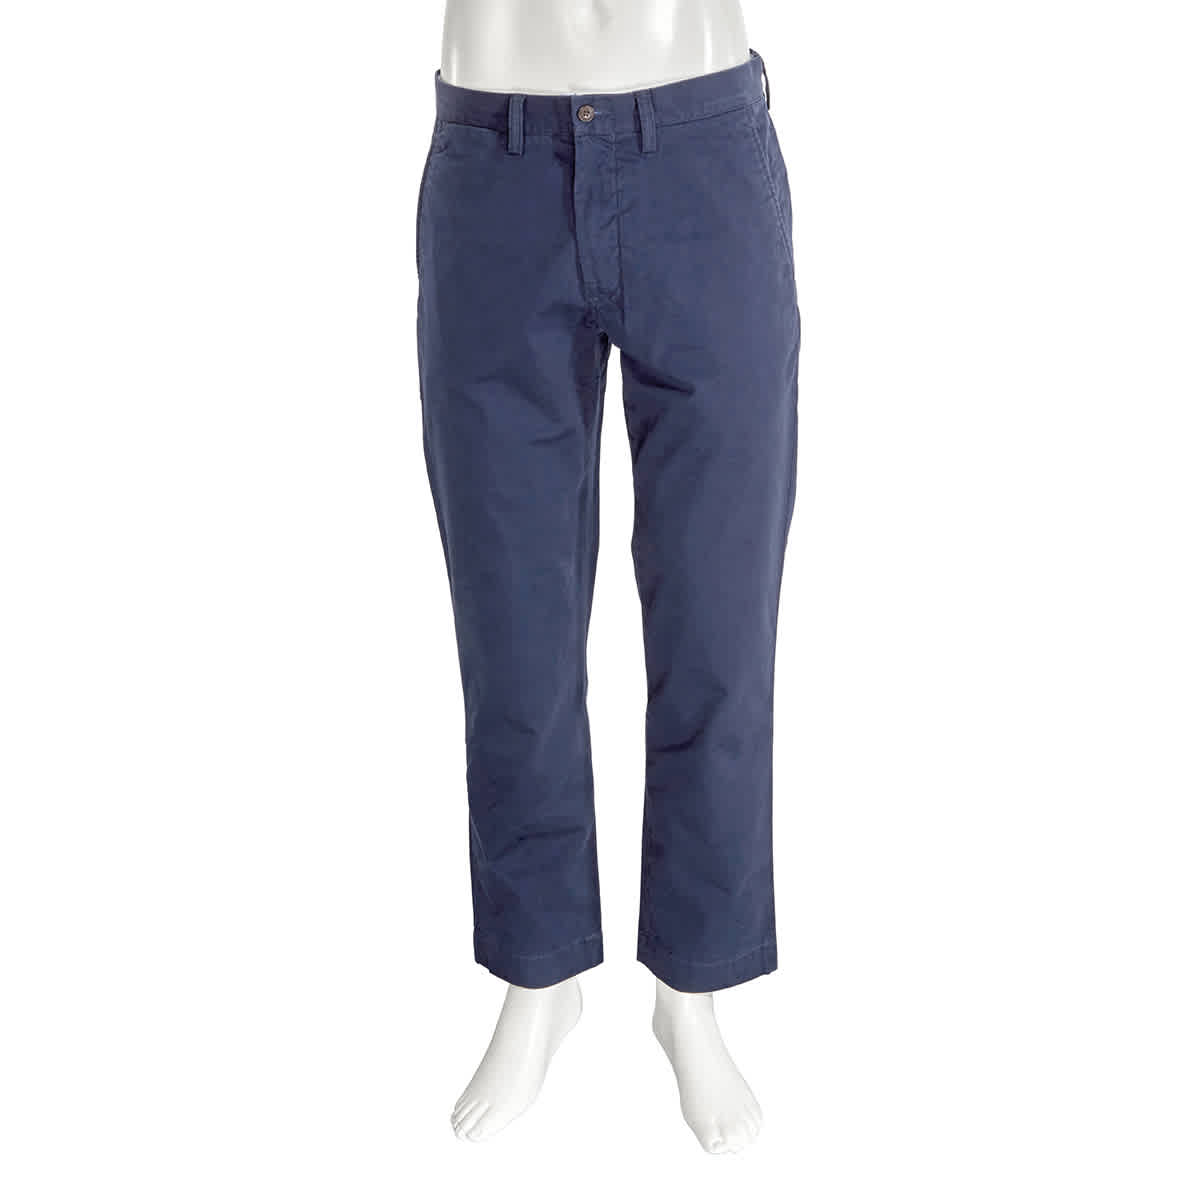 Polo Ralph Lauren Men's Classics Navy Bedford Pant Straight Fit, Brand Size 30W-30L - image 1 of 2